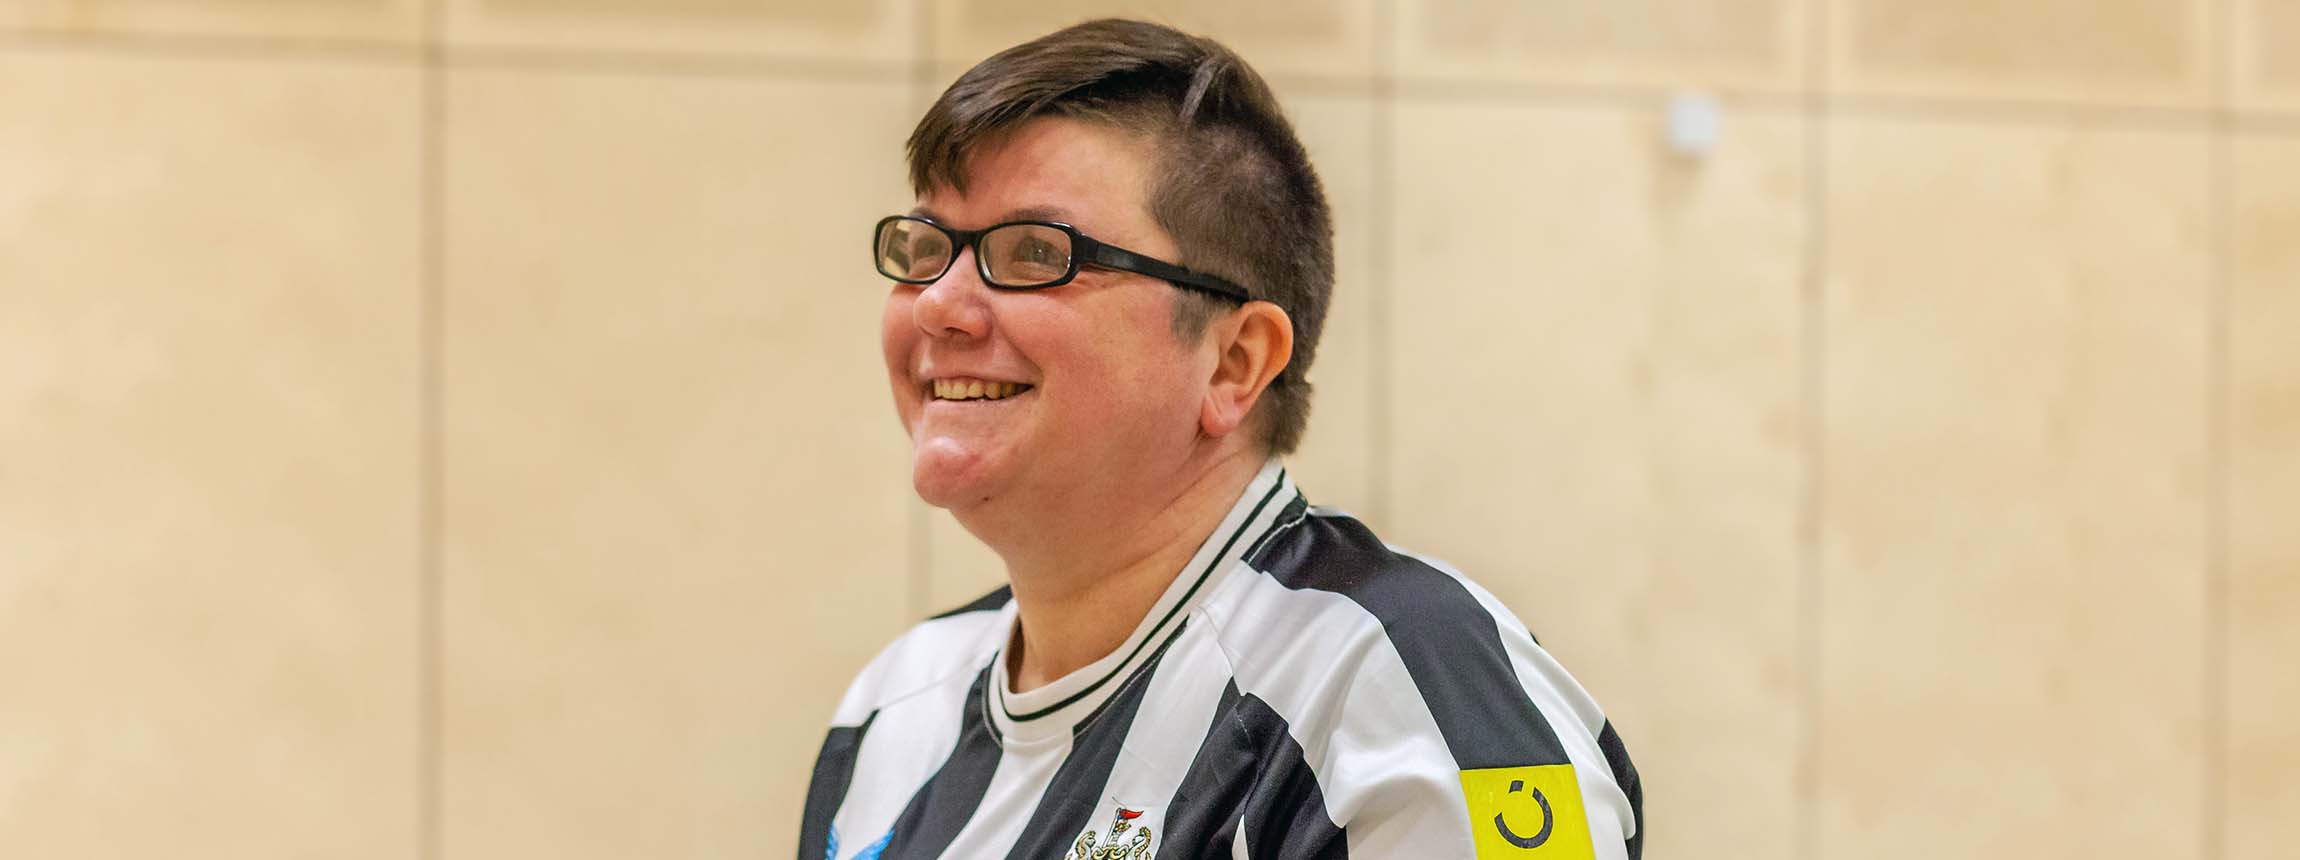 See sport differently tackles reasons why sport isn’t accessible for blind and partially sighted people